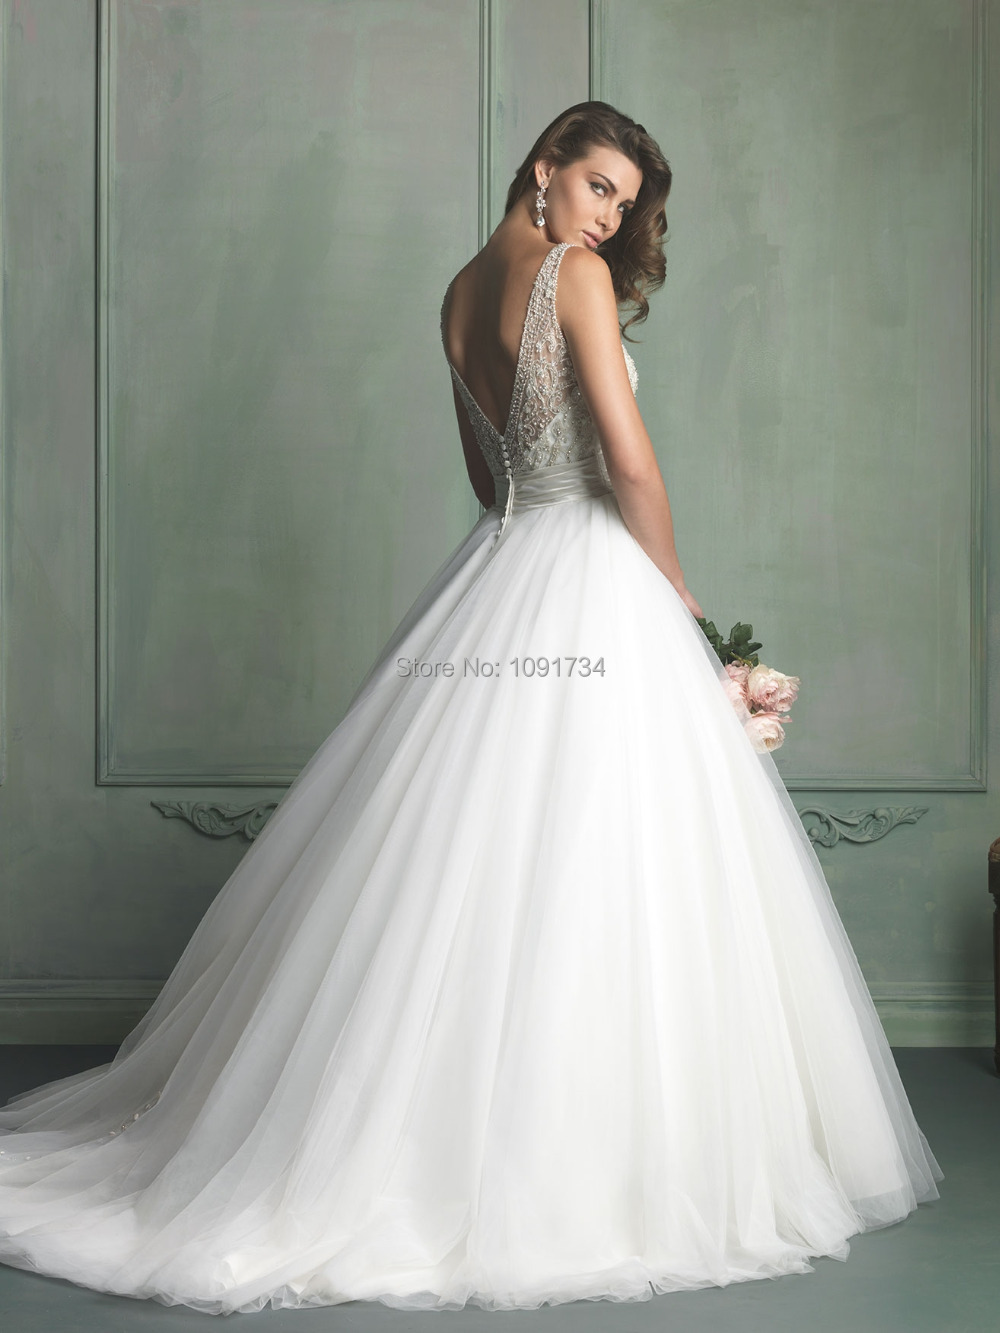 Sexy Ball Gown Wedding Dresses 2014 | Dress images